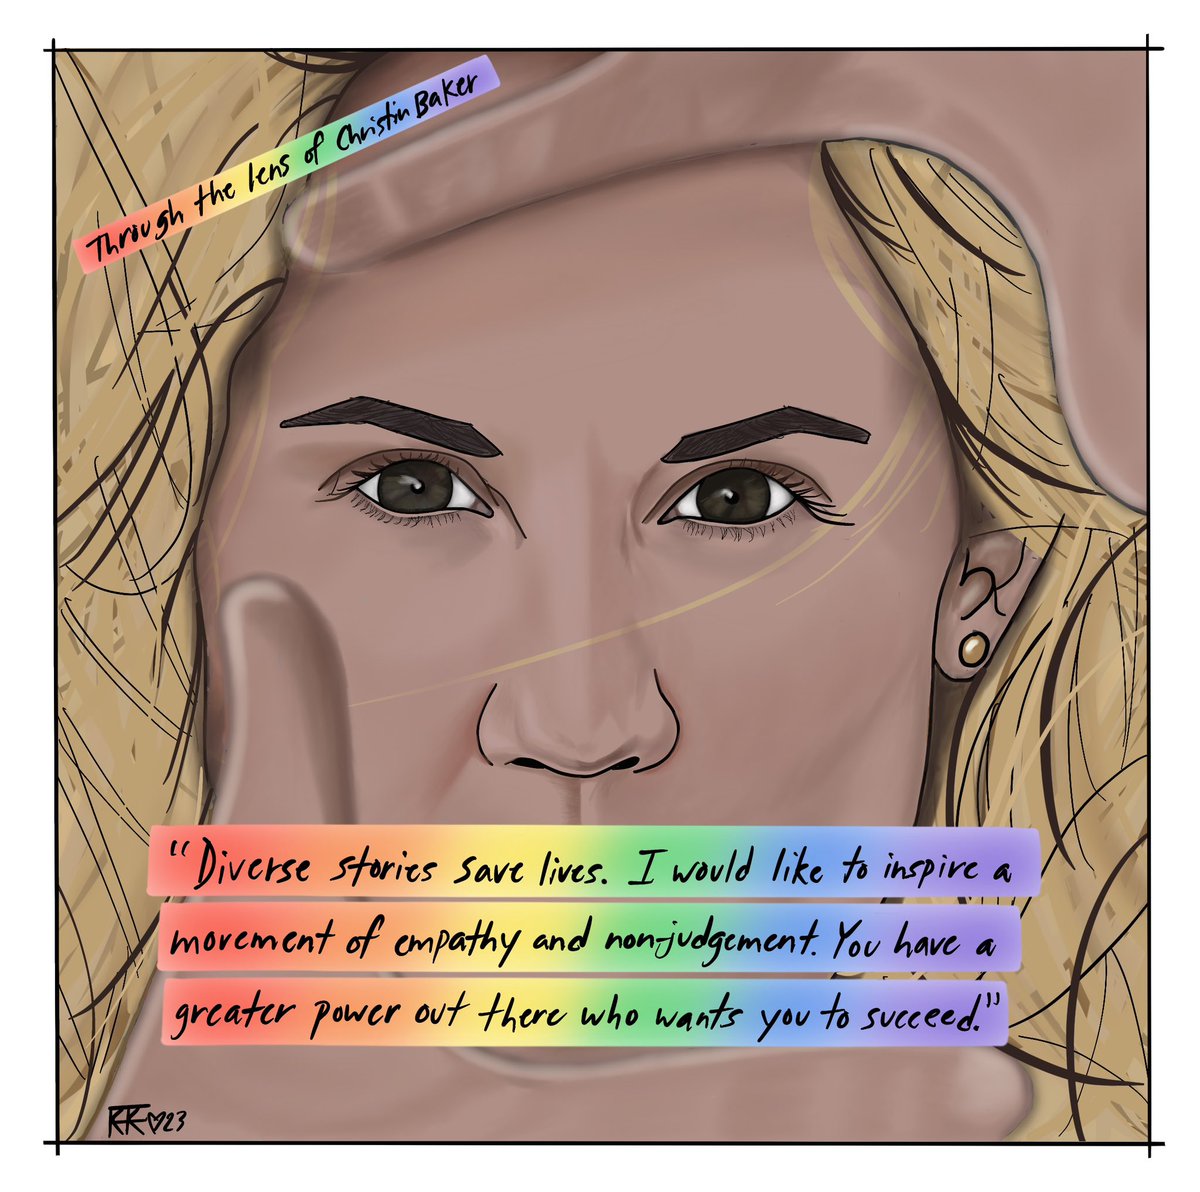 thought I’d create this piece of @christintello bc she has brought many amazing stories into our lives providing #queerrepresentation on screen. ✨ she also gave me & many others the rare opportunity to participate in a retreat, #ConnectingWithCreativity ❤️🌈

#queercreators